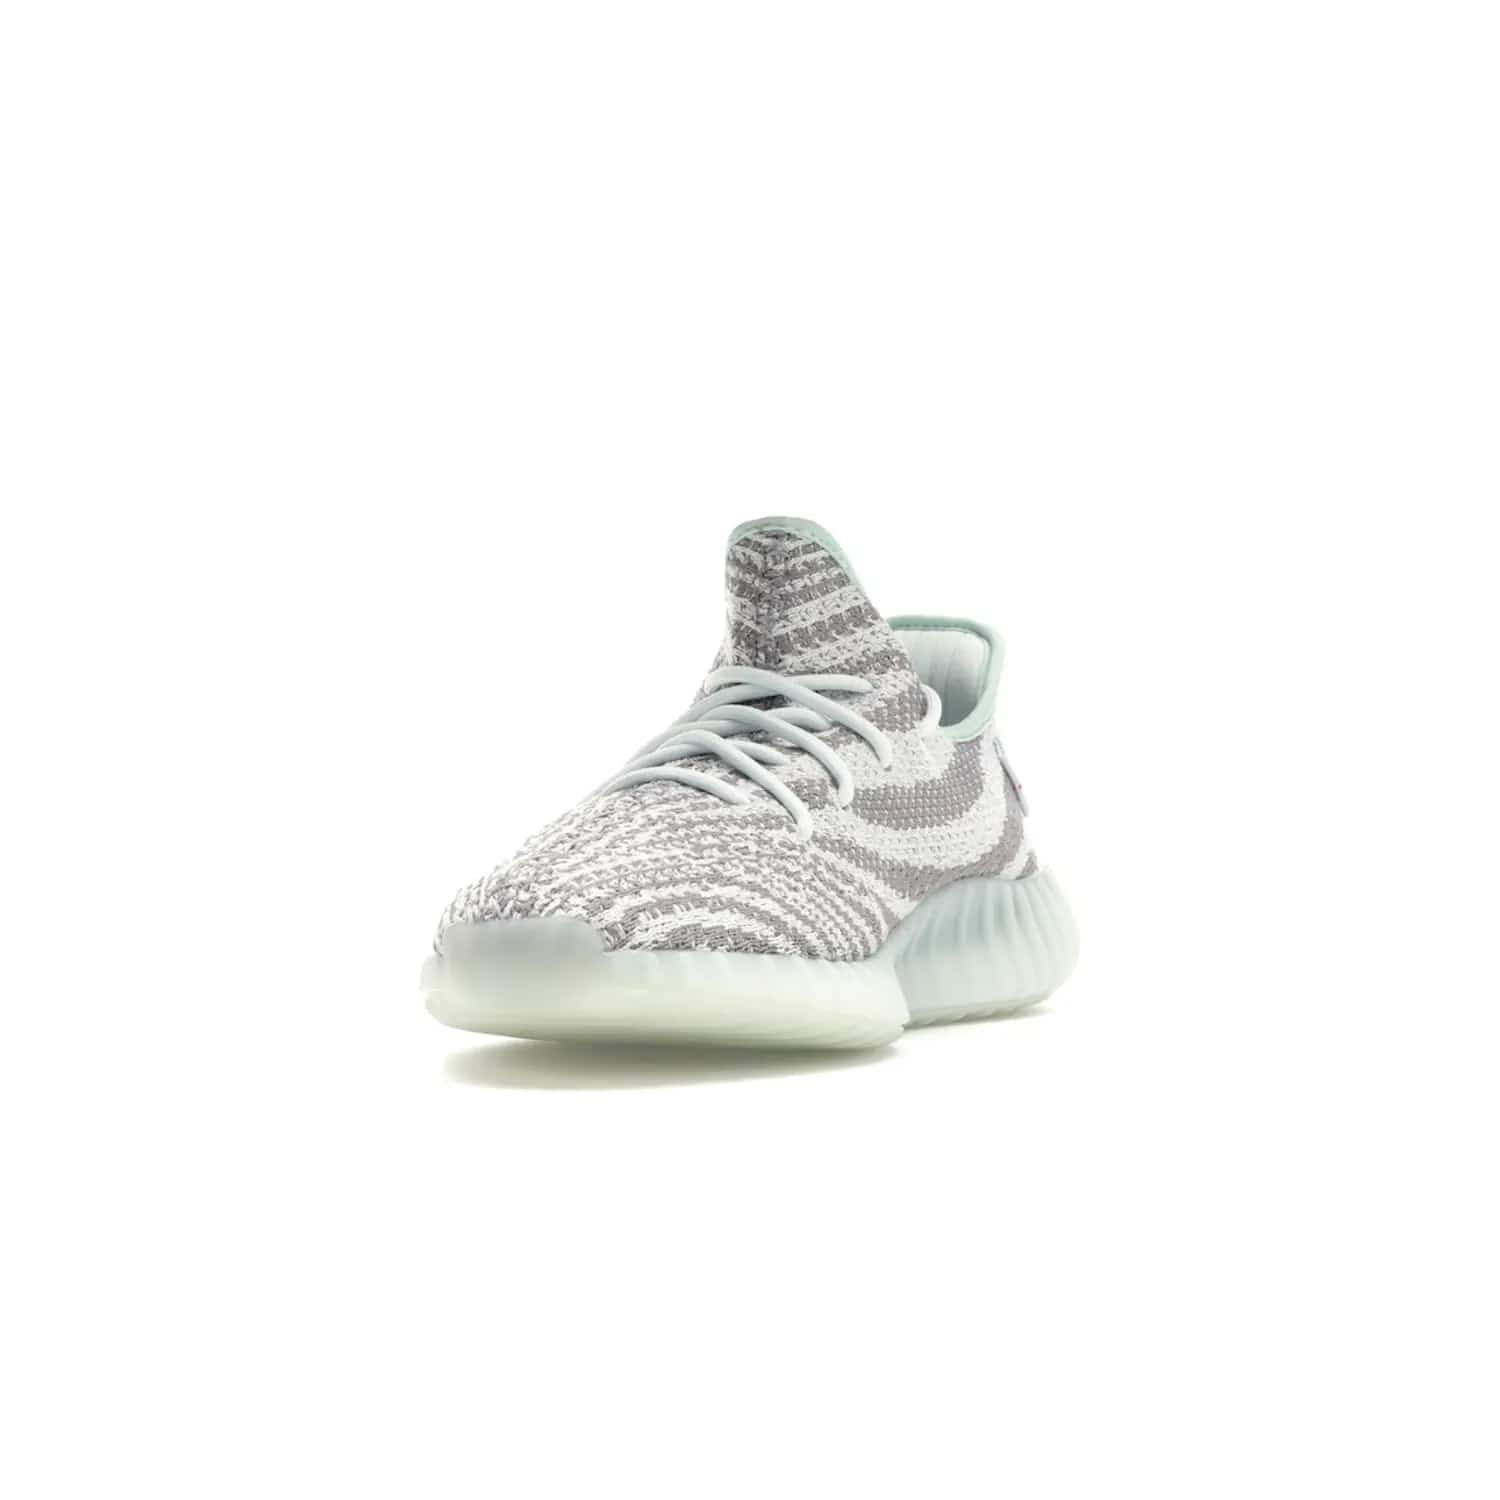 adidas Yeezy Boost 350 V2 Blue Tint - Image 13 - Only at www.BallersClubKickz.com - The adidas Yeezy Boost 350 V2 Blue Tint merges fashion and functionality with its Primeknit upper and Boost sole. Released in December 2017, this luxurious sneaker is perfect for making a stylish statement.